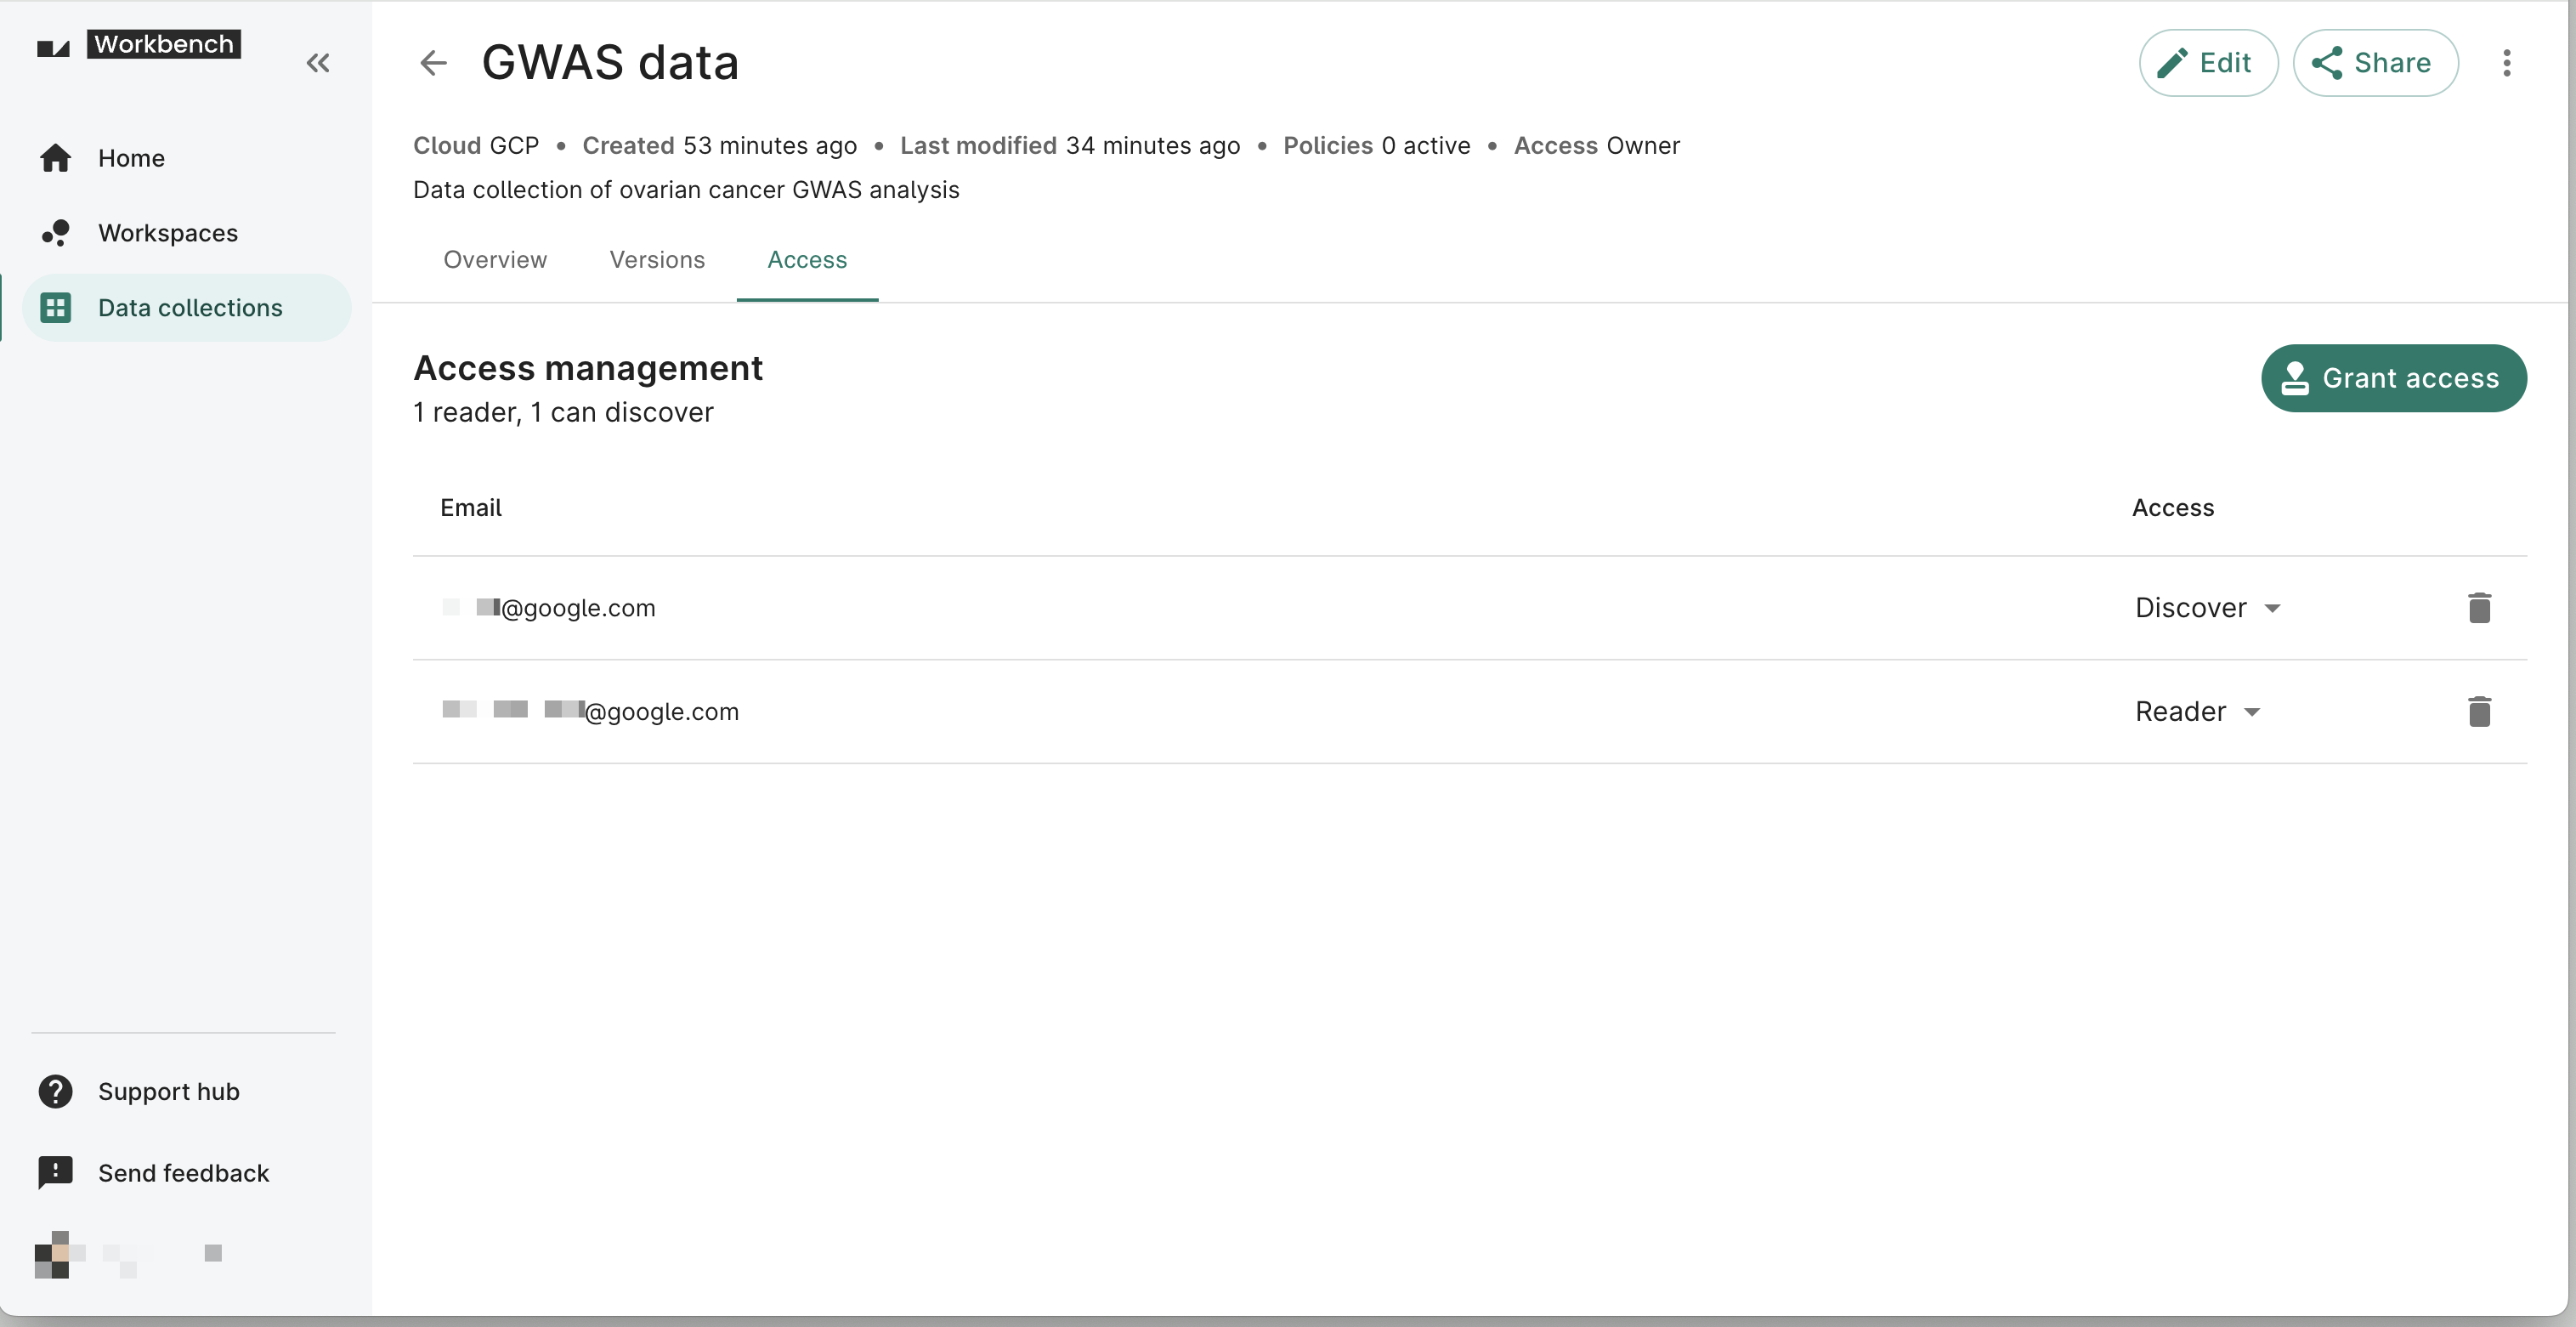 Screenshot of Access tab of a data collection showing two users listed with Discover and Reader access.